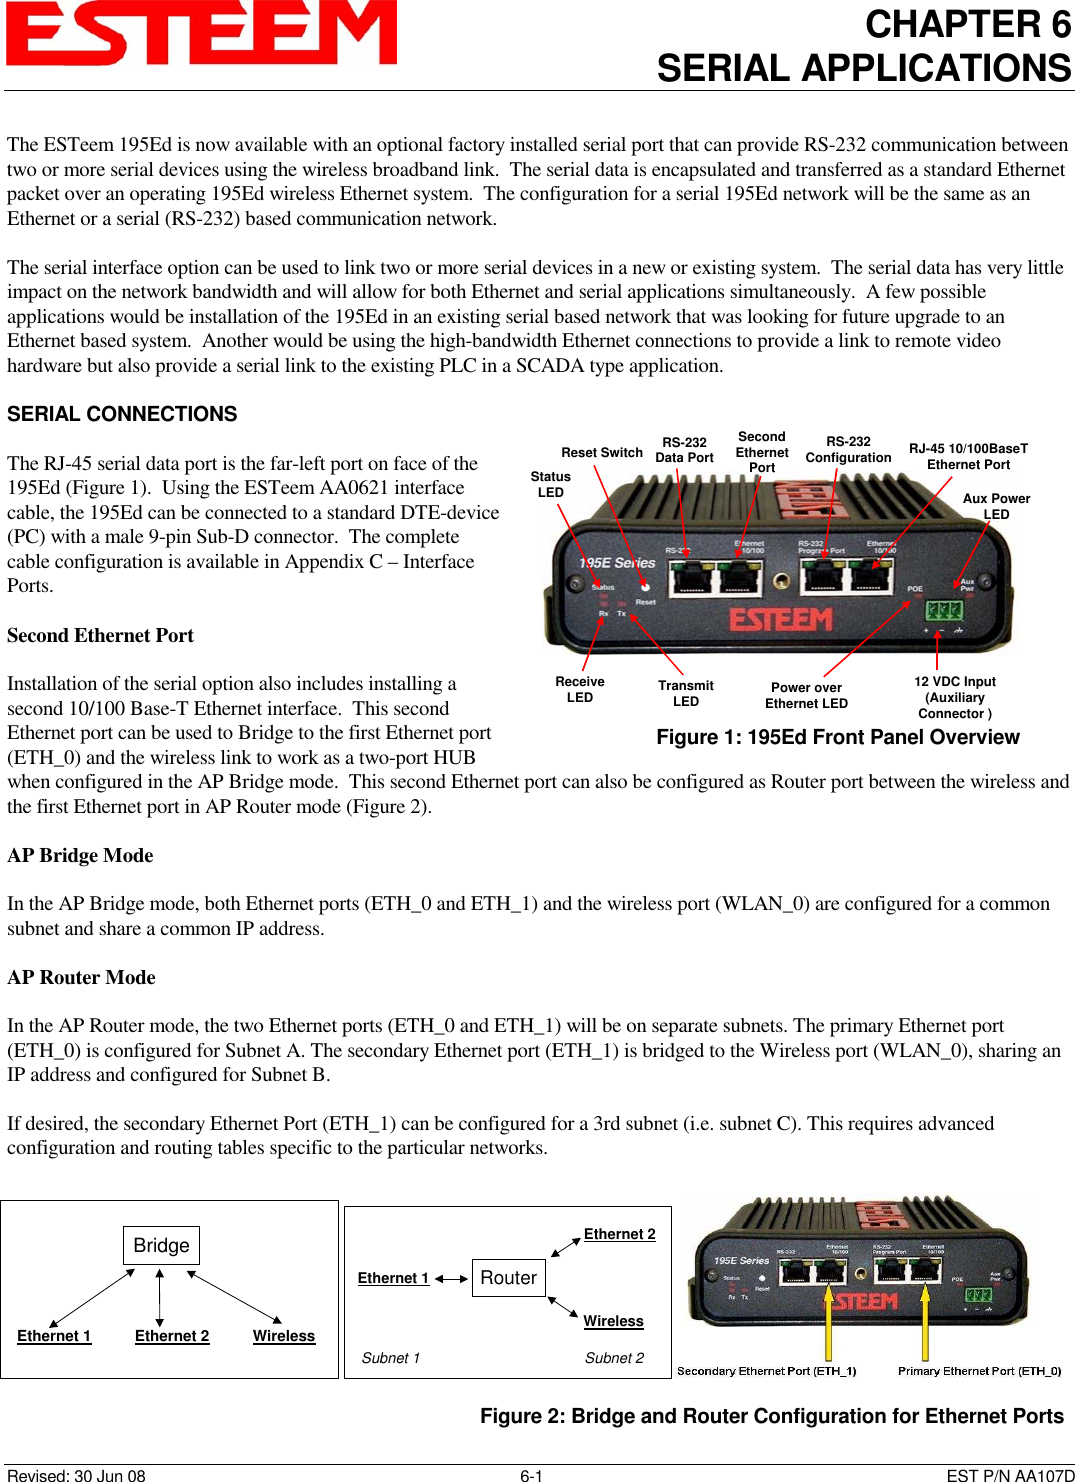 CHAPTER 6 SERIAL APPLICATIONS   Revised: 30 Jun 08  6-1  EST P/N AA107D The ESTeem 195Ed is now available with an optional factory installed serial port that can provide RS-232 communication between two or more serial devices using the wireless broadband link.  The serial data is encapsulated and transferred as a standard Ethernet packet over an operating 195Ed wireless Ethernet system.  The configuration for a serial 195Ed network will be the same as an Ethernet or a serial (RS-232) based communication network.  The serial interface option can be used to link two or more serial devices in a new or existing system.  The serial data has very little impact on the network bandwidth and will allow for both Ethernet and serial applications simultaneously.  A few possible applications would be installation of the 195Ed in an existing serial based network that was looking for future upgrade to an Ethernet based system.  Another would be using the high-bandwidth Ethernet connections to provide a link to remote video hardware but also provide a serial link to the existing PLC in a SCADA type application.  SERIAL CONNECTIONS  The RJ-45 serial data port is the far-left port on face of the 195Ed (Figure 1).  Using the ESTeem AA0621 interface cable, the 195Ed can be connected to a standard DTE-device (PC) with a male 9-pin Sub-D connector.  The complete cable configuration is available in Appendix C – Interface Ports.   Second Ethernet Port  Installation of the serial option also includes installing a second 10/100 Base-T Ethernet interface.  This second Ethernet port can be used to Bridge to the first Ethernet port (ETH_0) and the wireless link to work as a two-port HUB when configured in the AP Bridge mode.  This second Ethernet port can also be configured as Router port between the wireless and the first Ethernet port in AP Router mode (Figure 2).  AP Bridge Mode  In the AP Bridge mode, both Ethernet ports (ETH_0 and ETH_1) and the wireless port (WLAN_0) are configured for a common subnet and share a common IP address.   AP Router Mode  In the AP Router mode, the two Ethernet ports (ETH_0 and ETH_1) will be on separate subnets. The primary Ethernet port (ETH_0) is configured for Subnet A. The secondary Ethernet port (ETH_1) is bridged to the Wireless port (WLAN_0), sharing an IP address and configured for Subnet B.  If desired, the secondary Ethernet Port (ETH_1) can be configured for a 3rd subnet (i.e. subnet C). This requires advanced configuration and routing tables specific to the particular networks.  12 VDC Input(AuxiliaryConnector )Reset Switch RS-232Configuration RJ-45 10/100BaseTEthernet PortTransmitLEDReceiveLEDStatusLEDPower overEthernet LEDAux PowerLEDRS-232Data PortSecondEthernetPortFigure 1: 195Ed Front Panel Overview BridgeEthernet 1 Ethernet 2 Wireless RouterEthernet 1Ethernet 2WirelessSubnet 1 Subnet 2  Figure 2: Bridge and Router Configuration for Ethernet Ports 